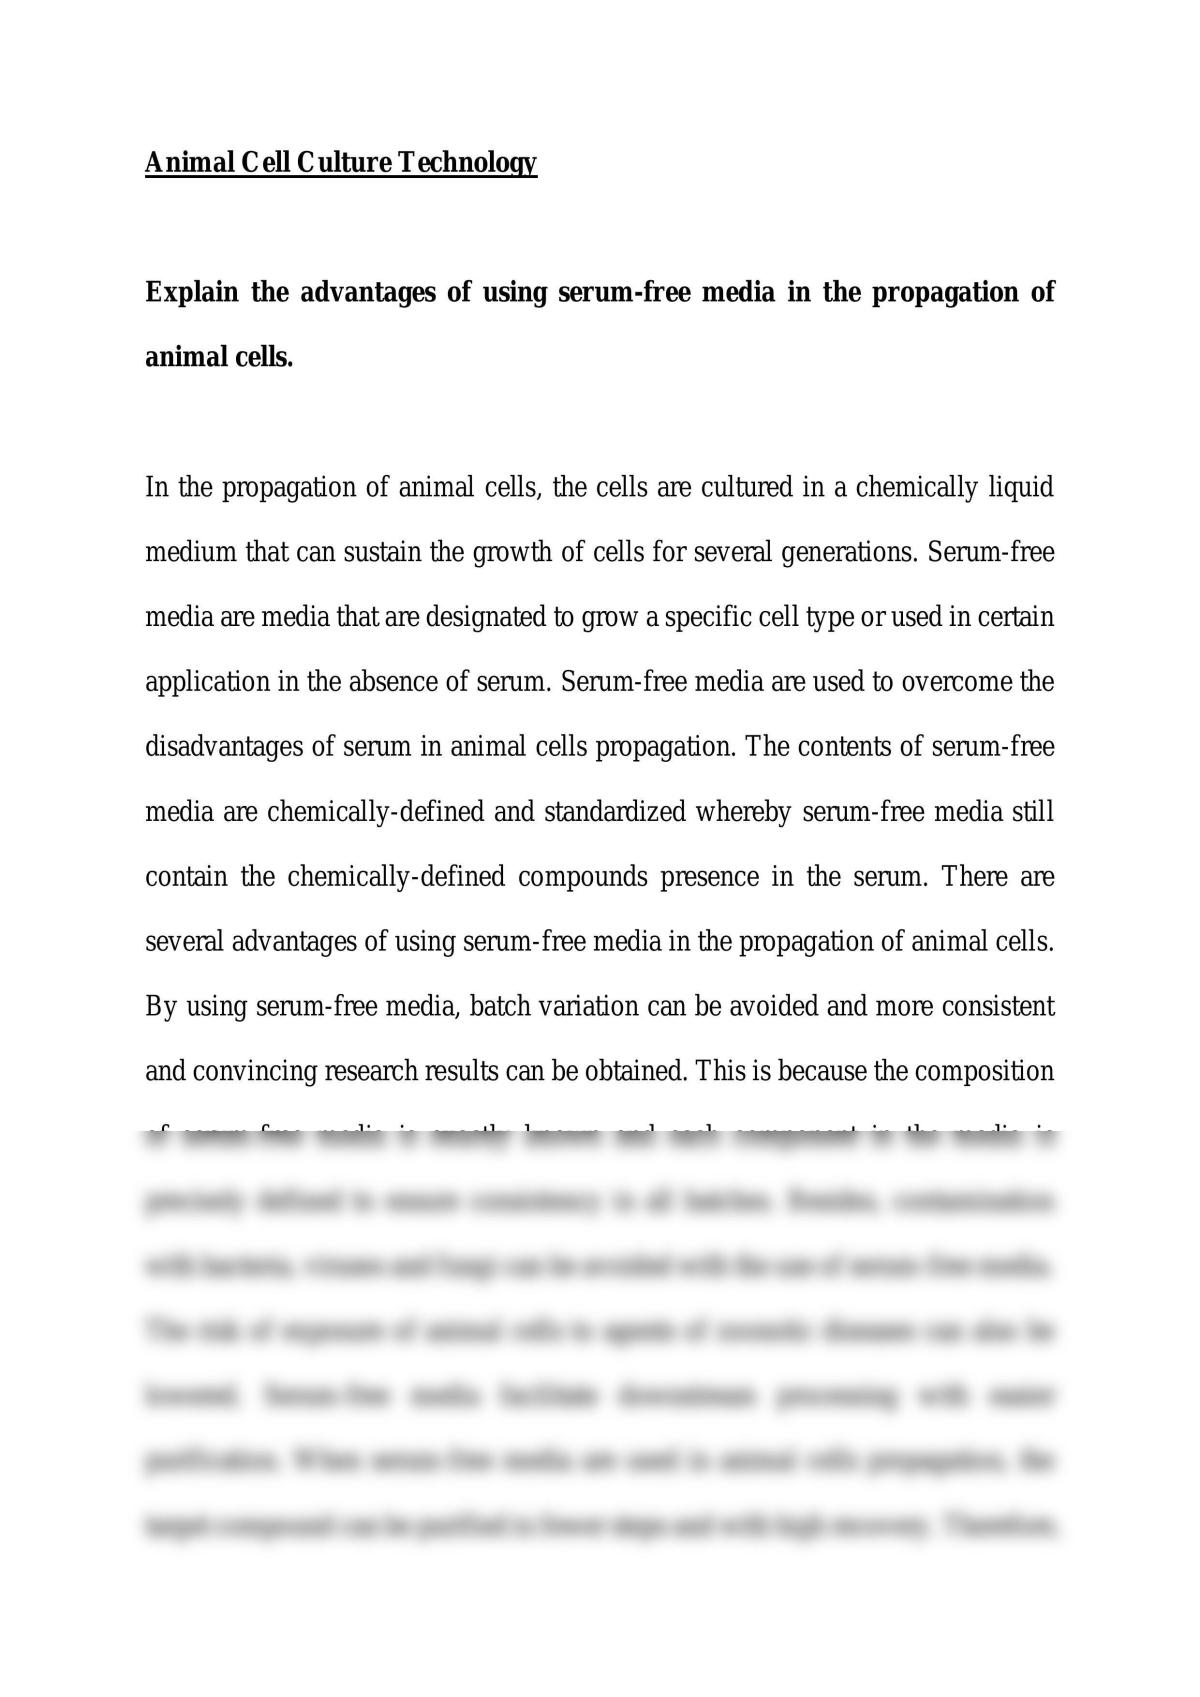 Animal Cell Culture Technology Essay - Page 1